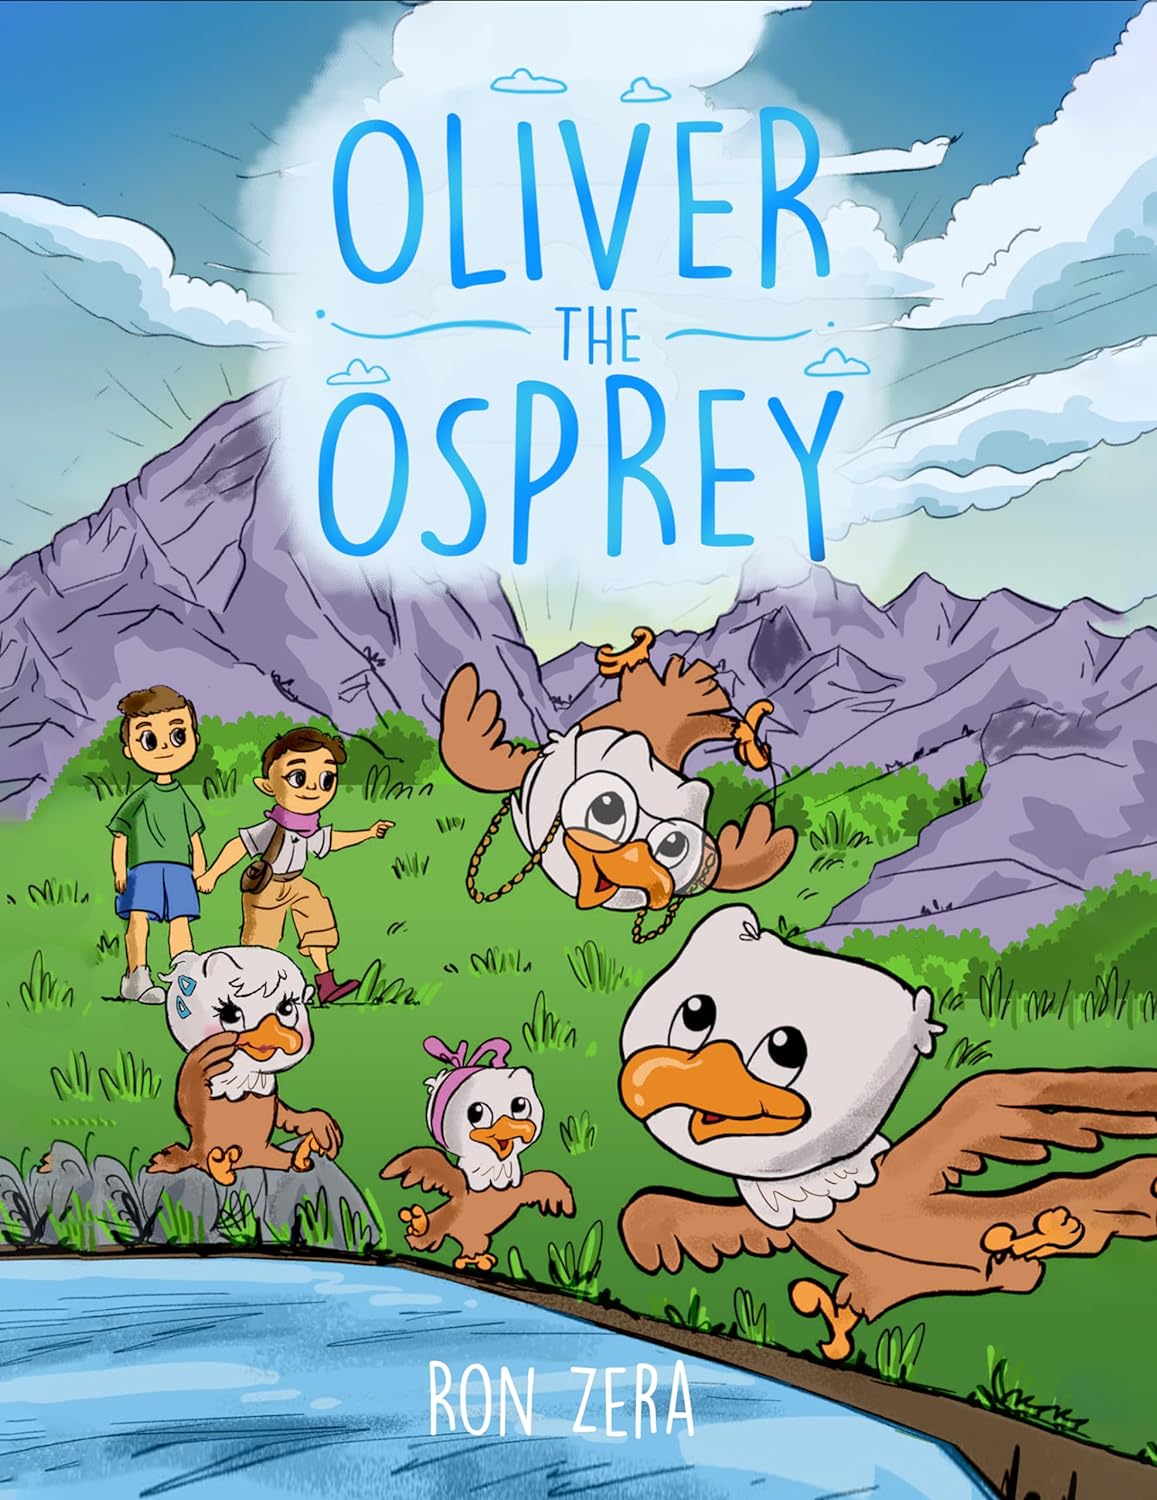 Ron Zera Releases New Children’s Book - Oliver the Osprey